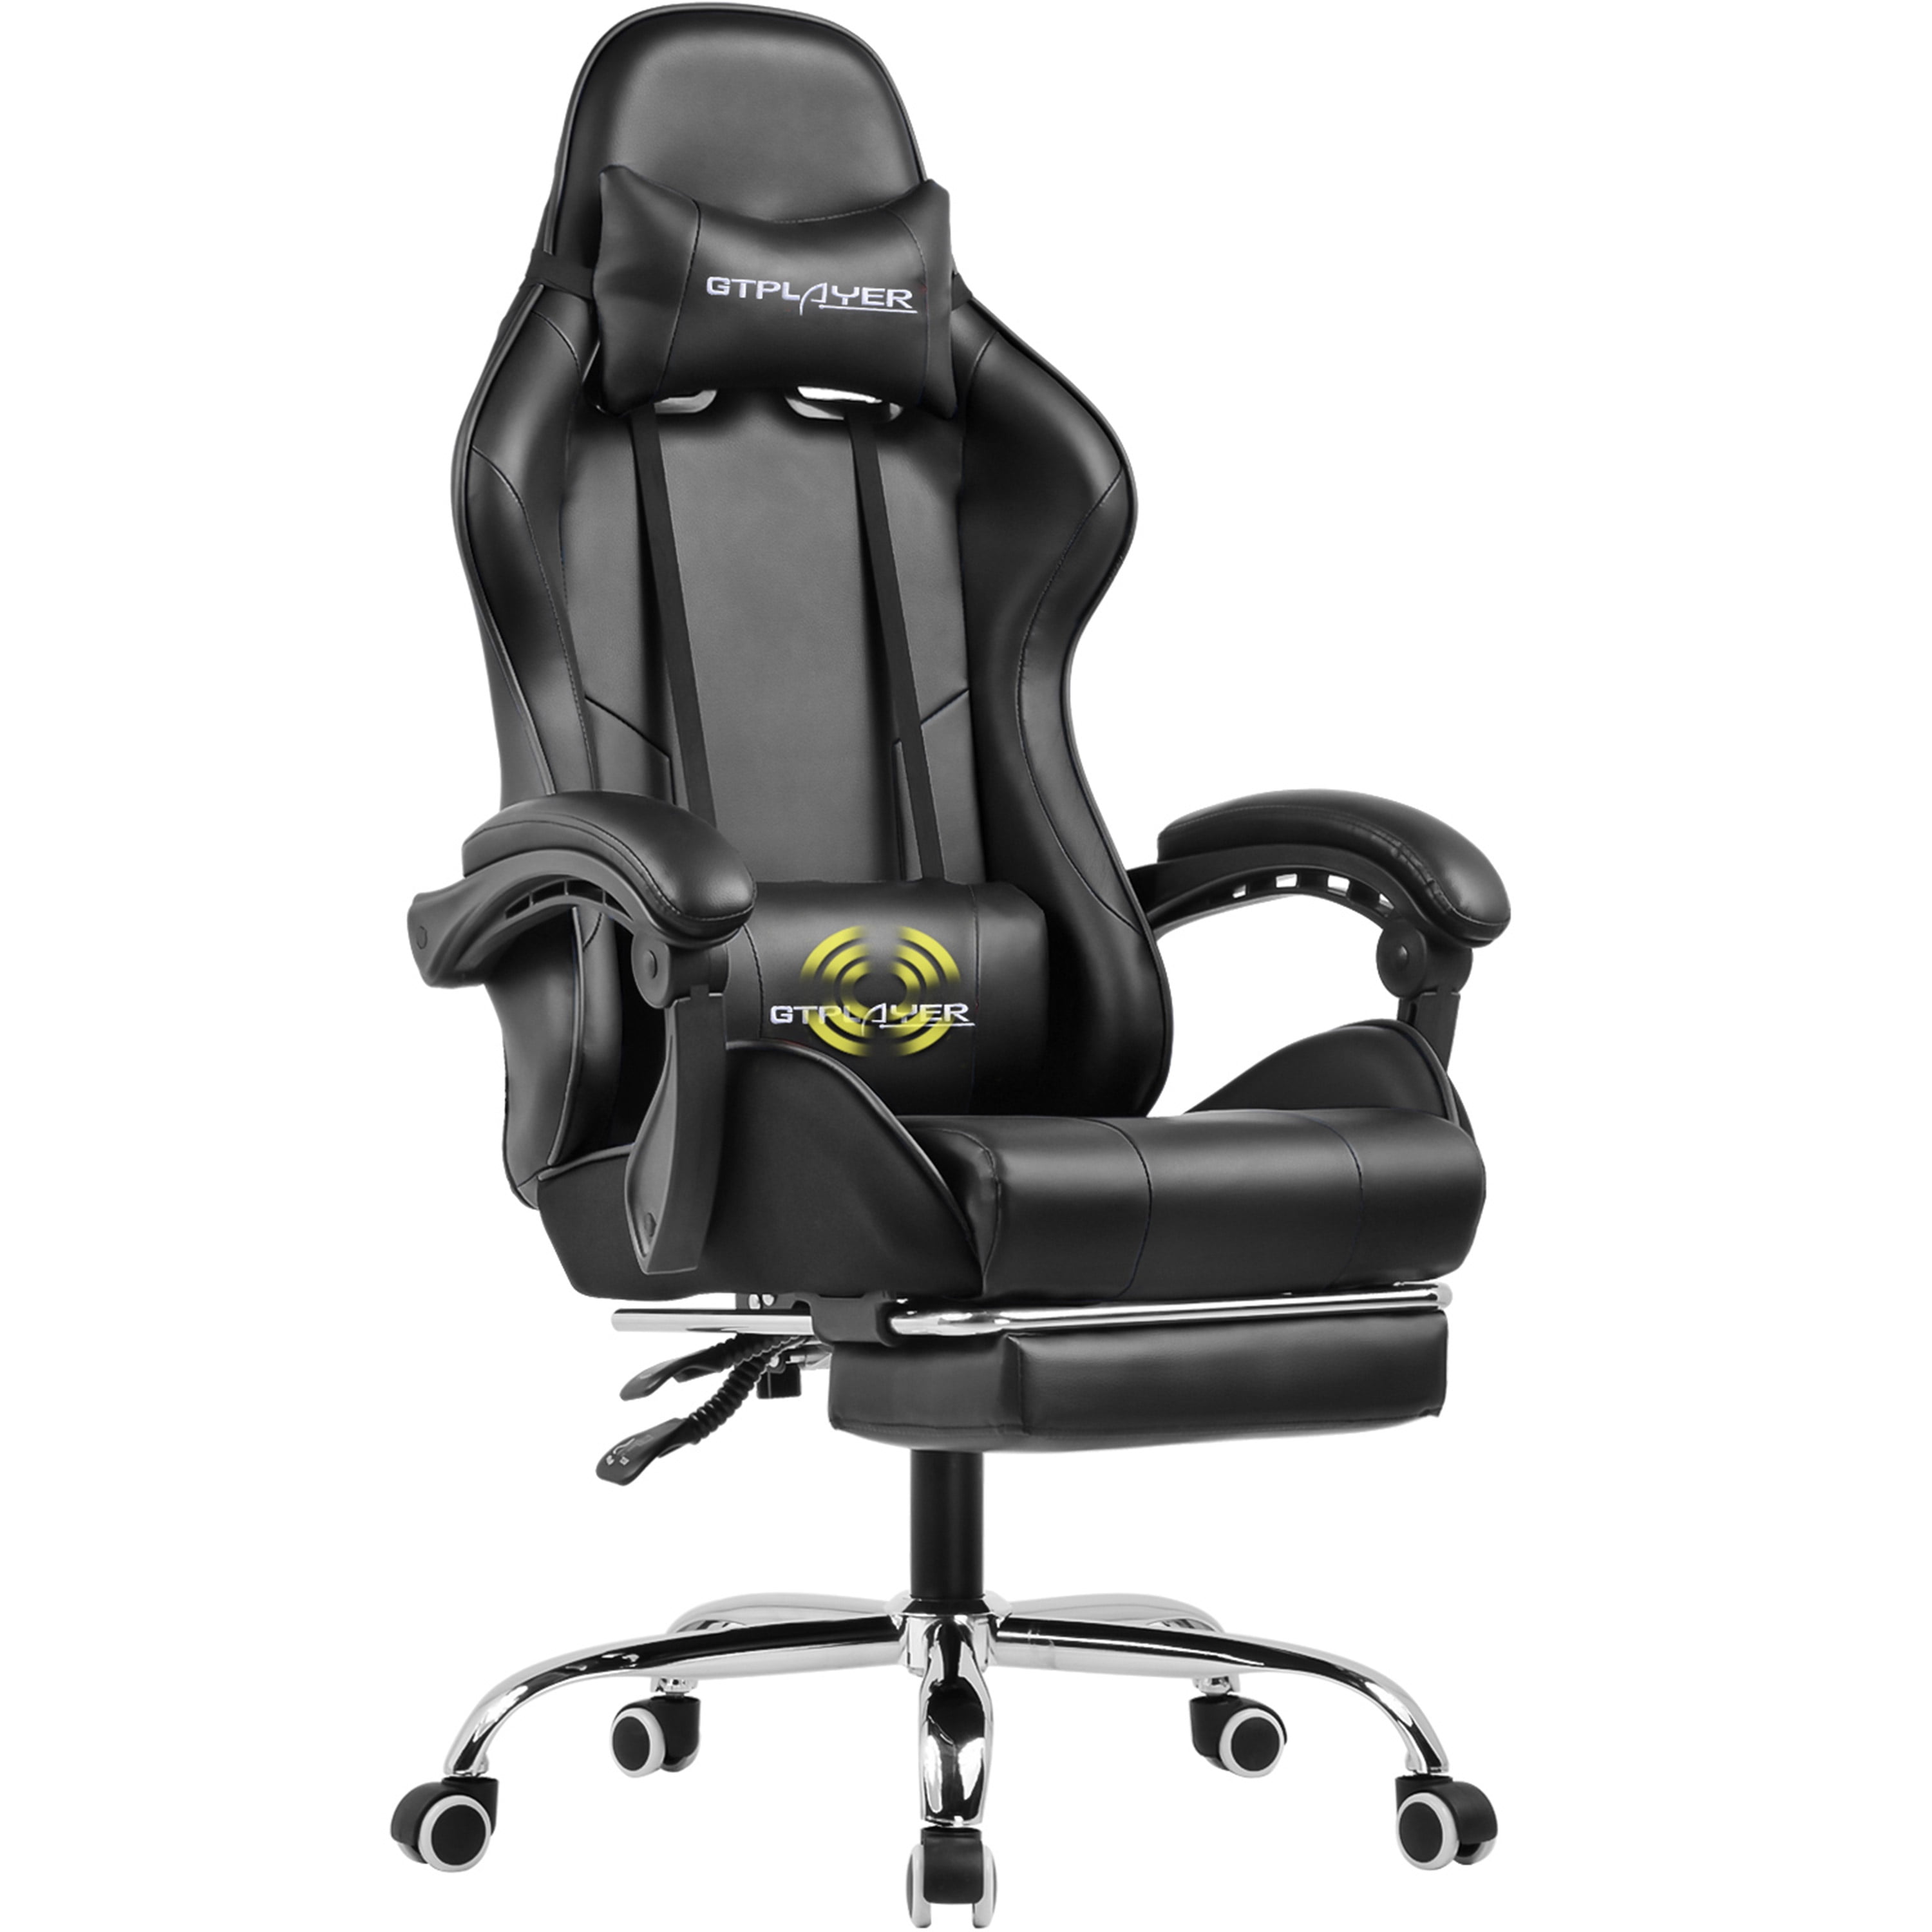 VON Racer Massage Gaming Chair Racing Computer Desk Office Chair Swivel Ergonomic Executive Bonded Leather Chair with Headrest Footrest and Adjustable Armrests,Black 